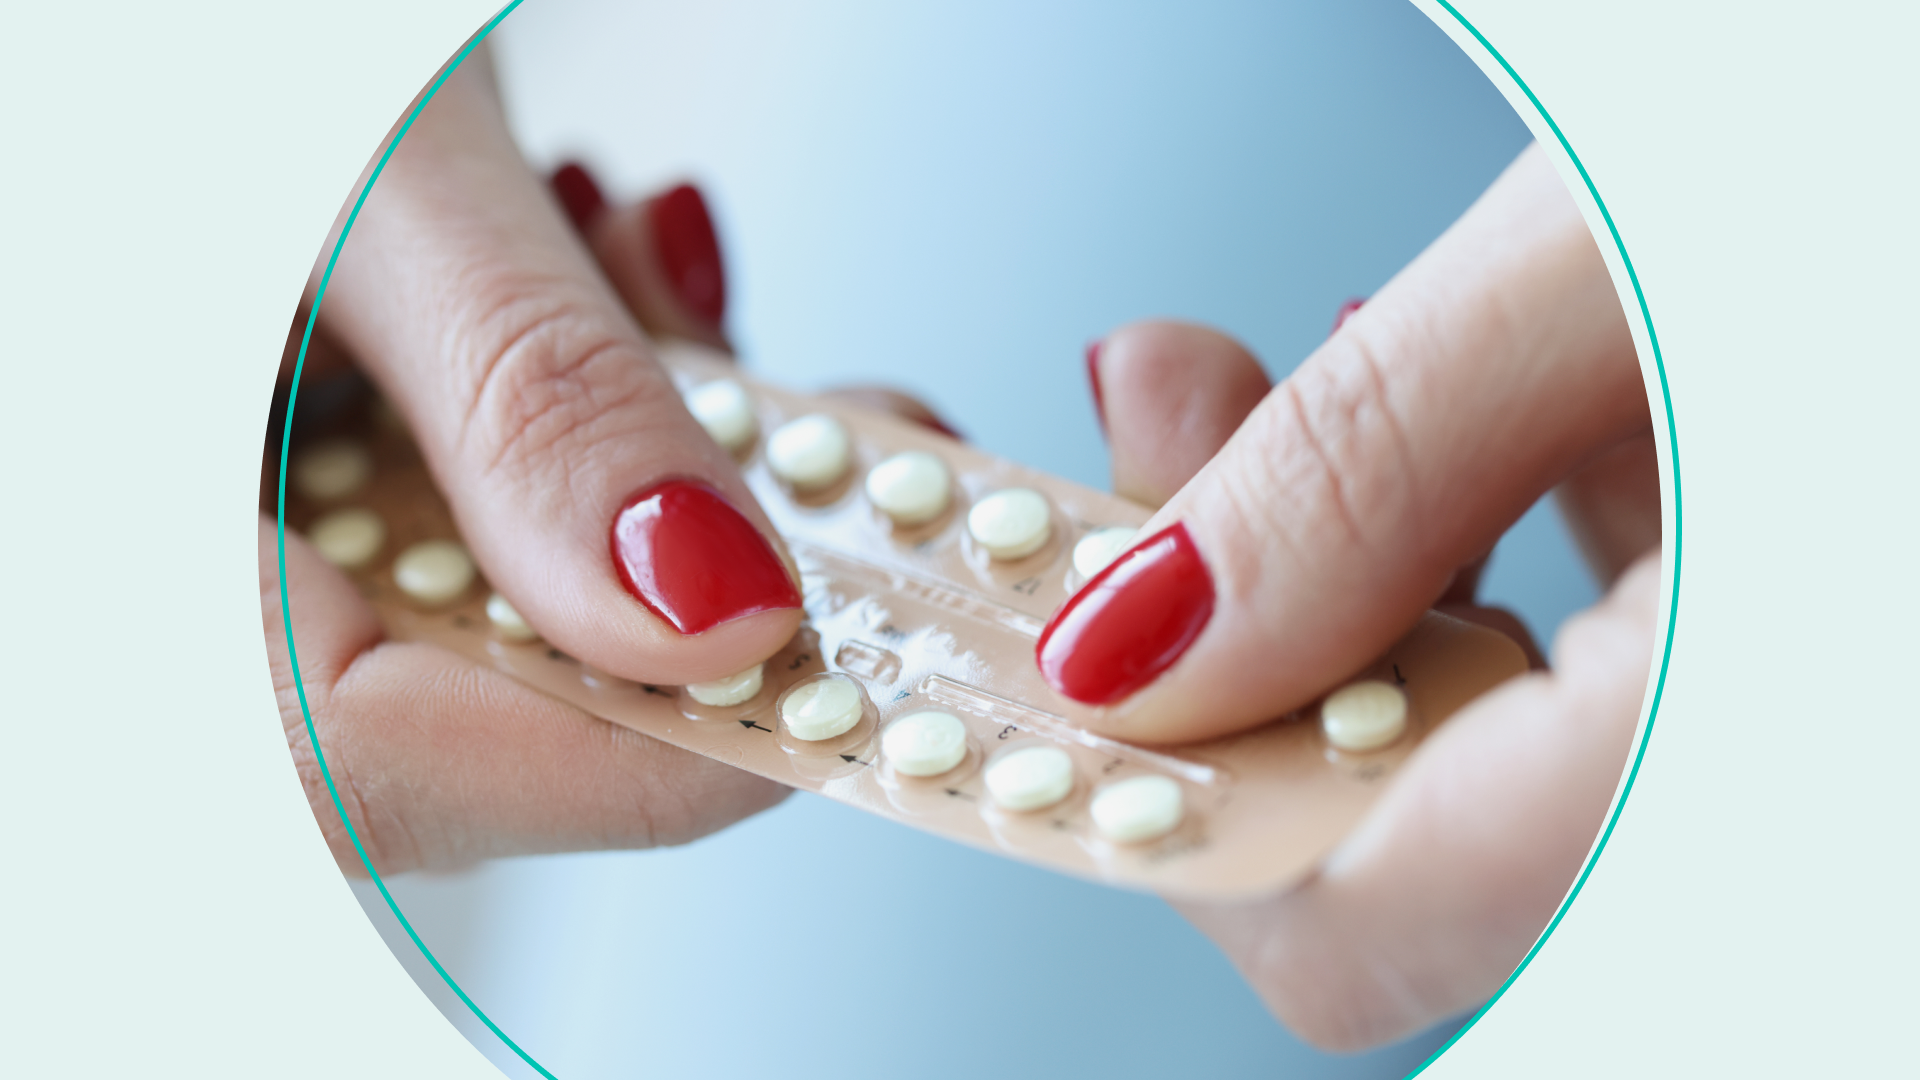 Woman holds pack of hormonal contraceptive birth control